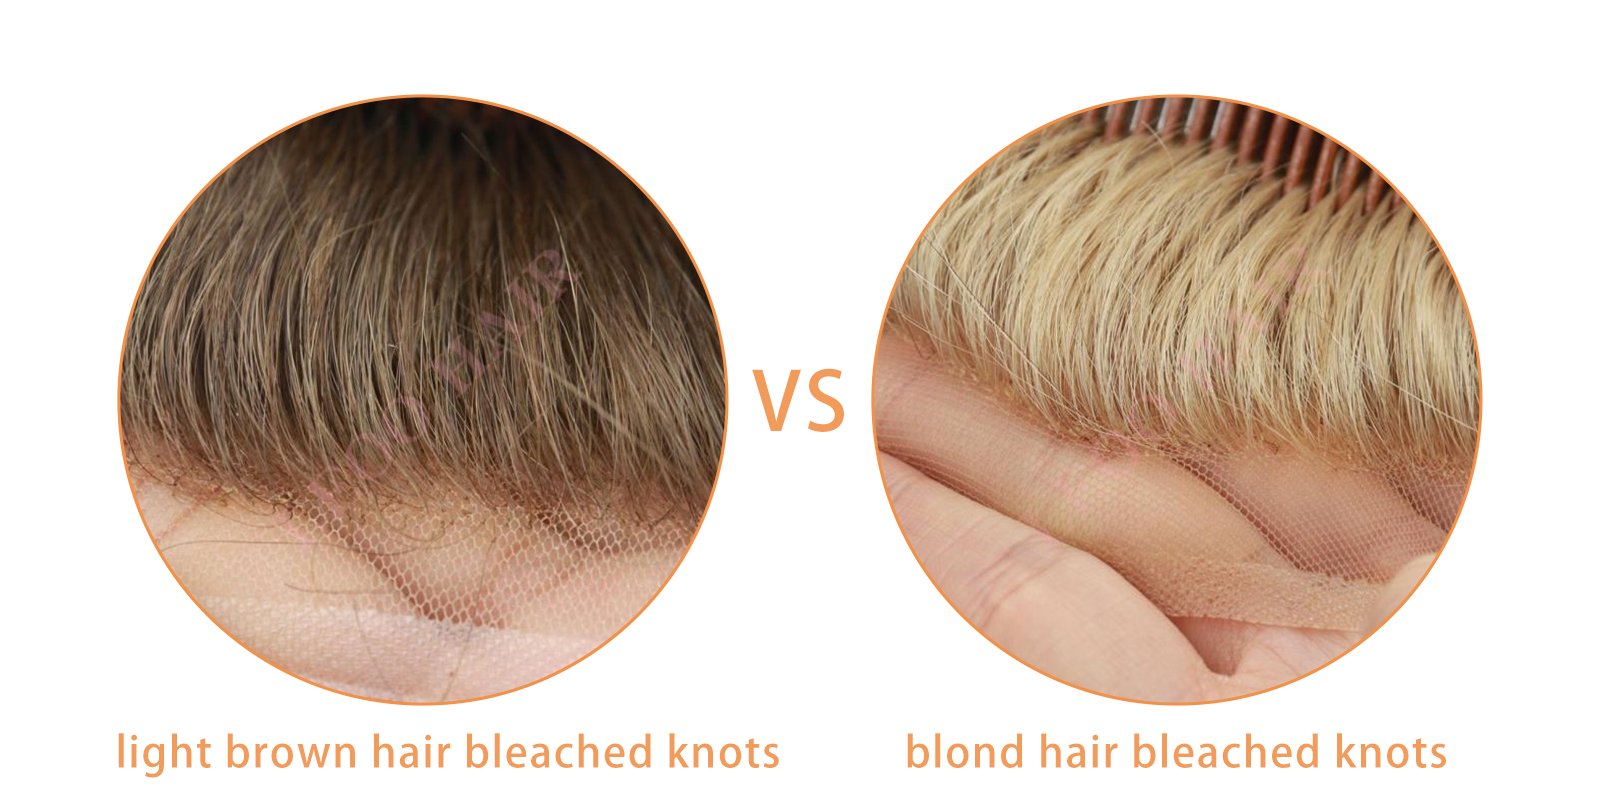 light brown and blond hair bleached knots